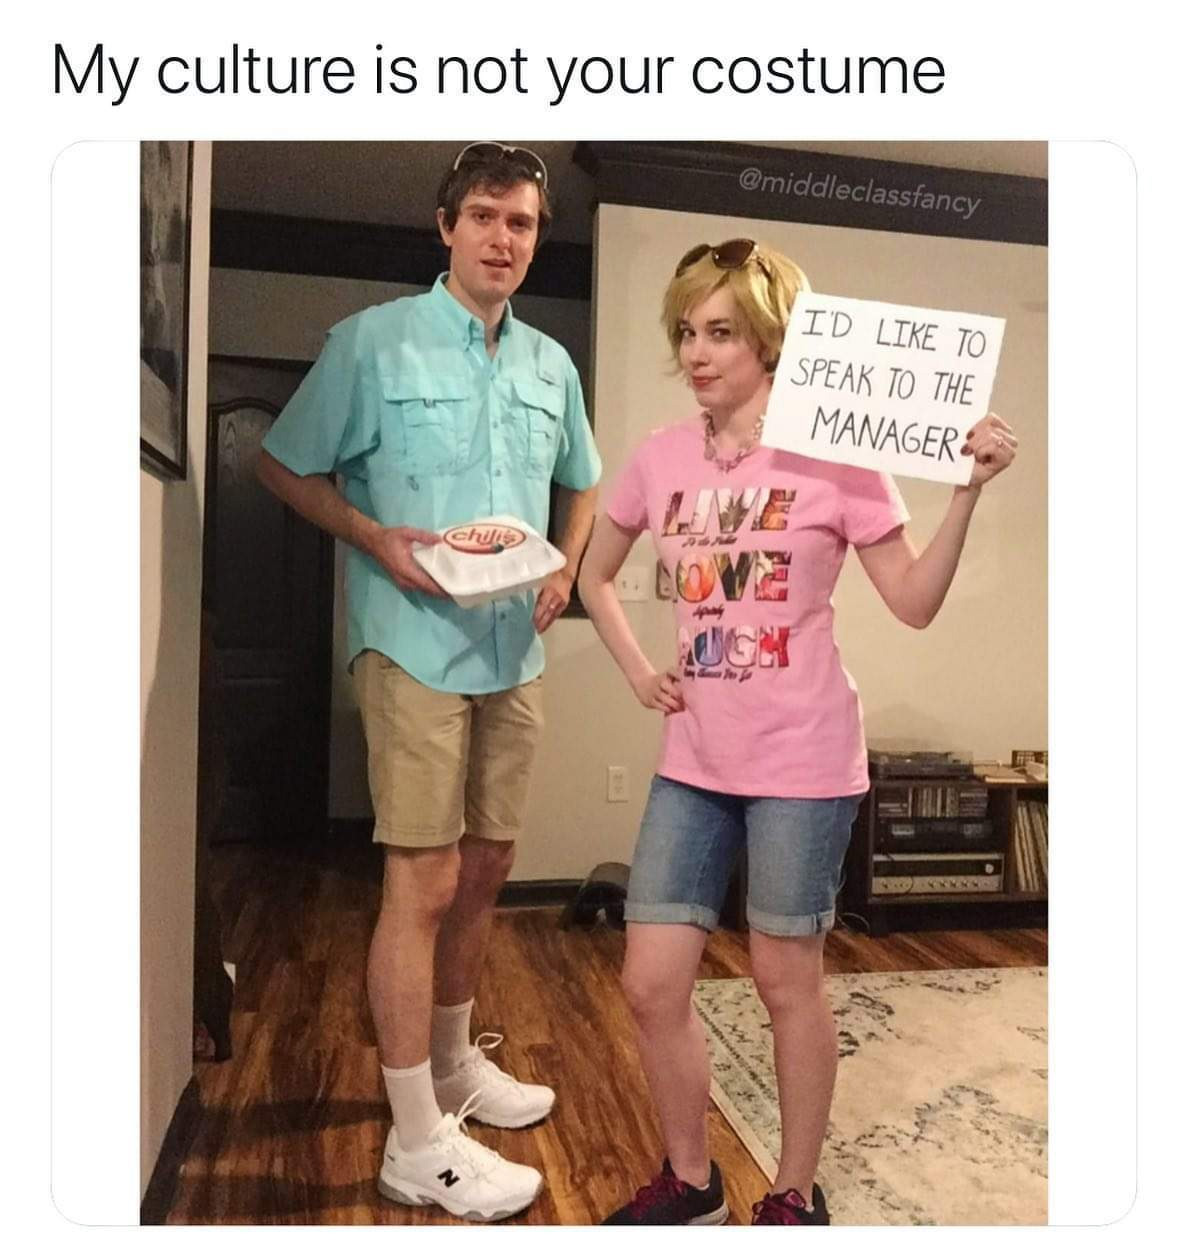 halloween memes - funny halloween costumes memes - My culture is not your costume I'D To Speak To The Manager Chuis Cove Ucky